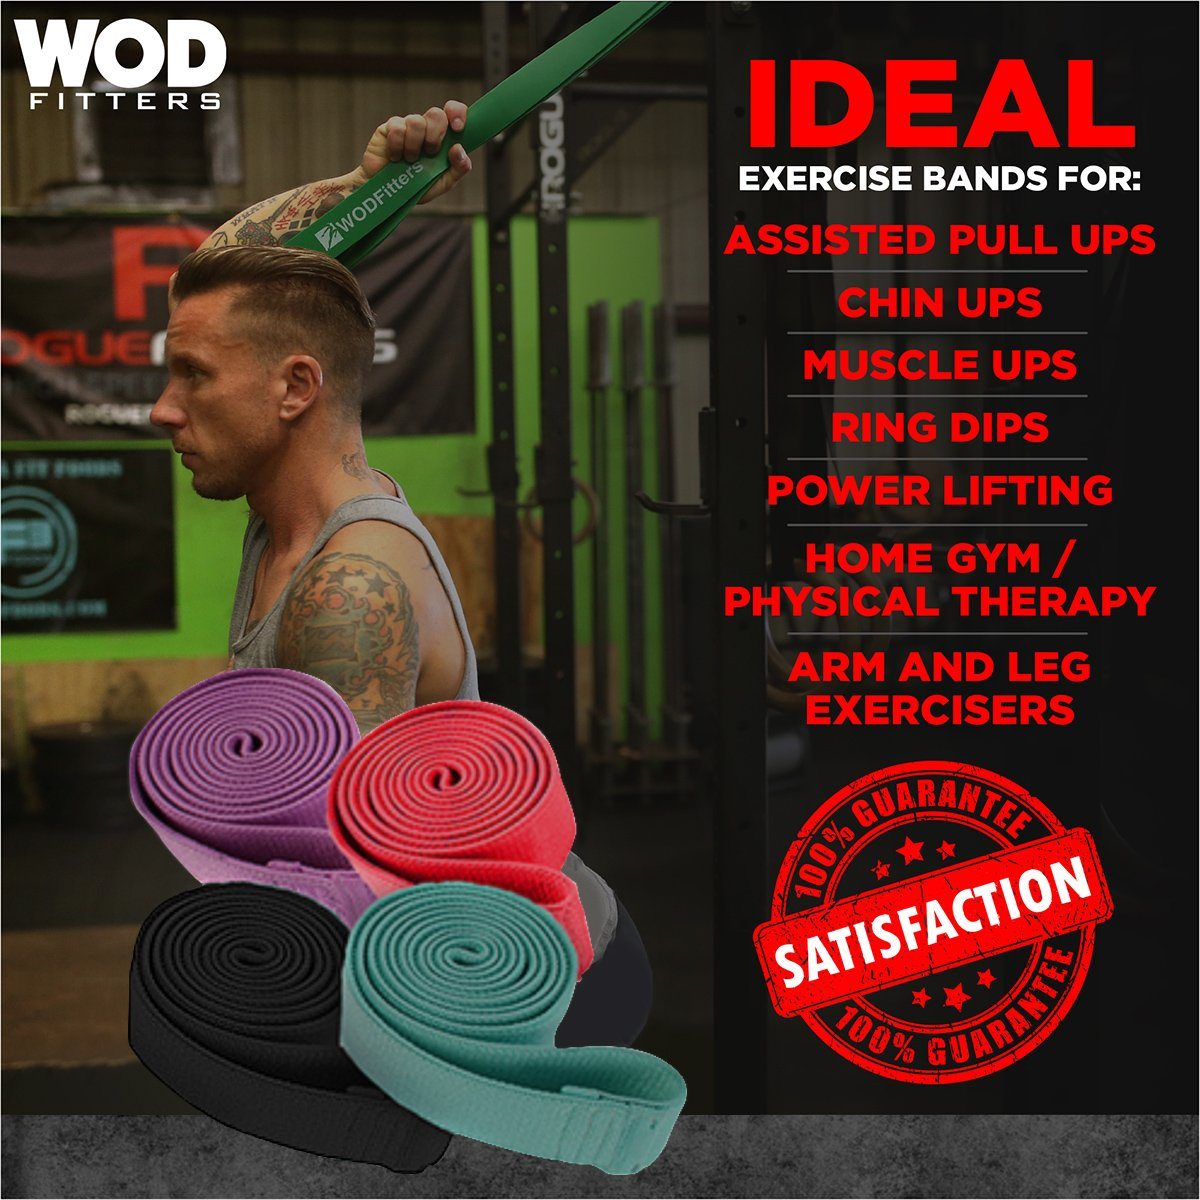 Bands - WODFitters Fabric Pull Up Resistance Bands - 4 Band Set - Set Of 4 Fabric Resistance Bands (41" Loop) For Exercise, Stretching, Home Workout